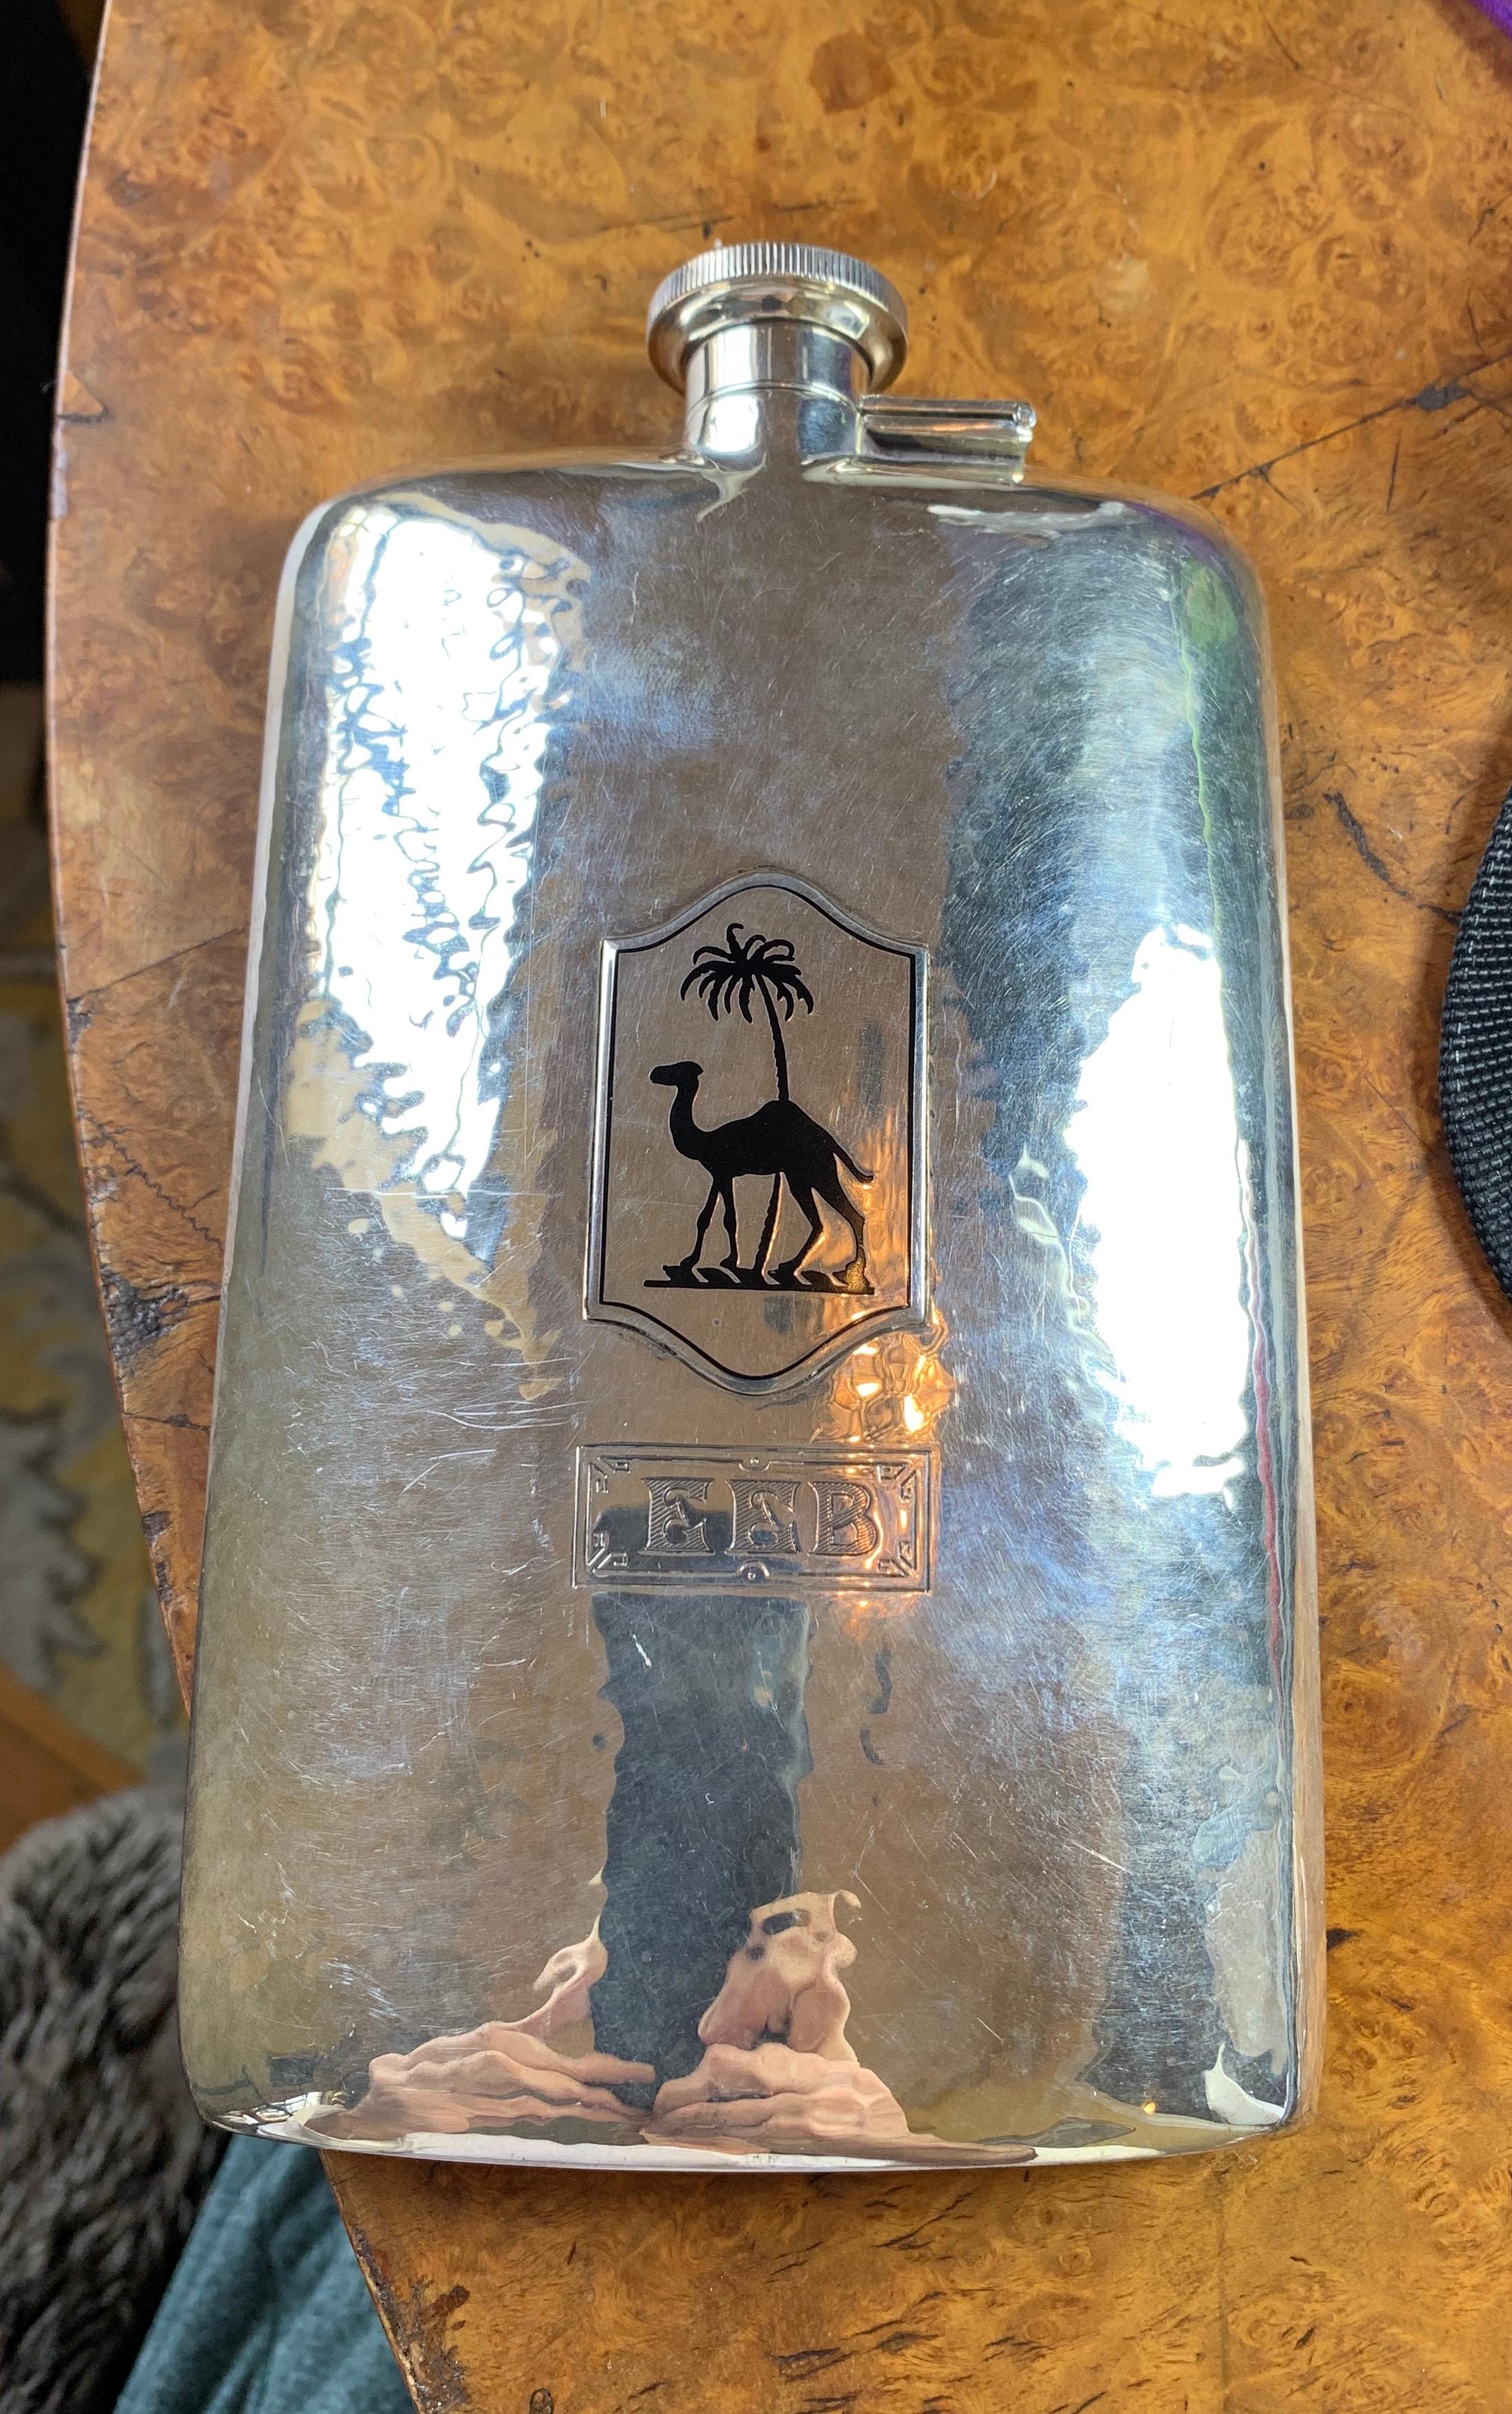 THIS IS A STUNNING AND RARE ART DECO LARGE SIZE POCKET FLASK IN STERLING SILVER AND ENAMEL WITH AN EGYPTIAN REVIVAL MOTIF OF A CAMEL AND PALM TREE.
This is a very special and rare pocket flask.  Flasks really do not get better than this.  The flask